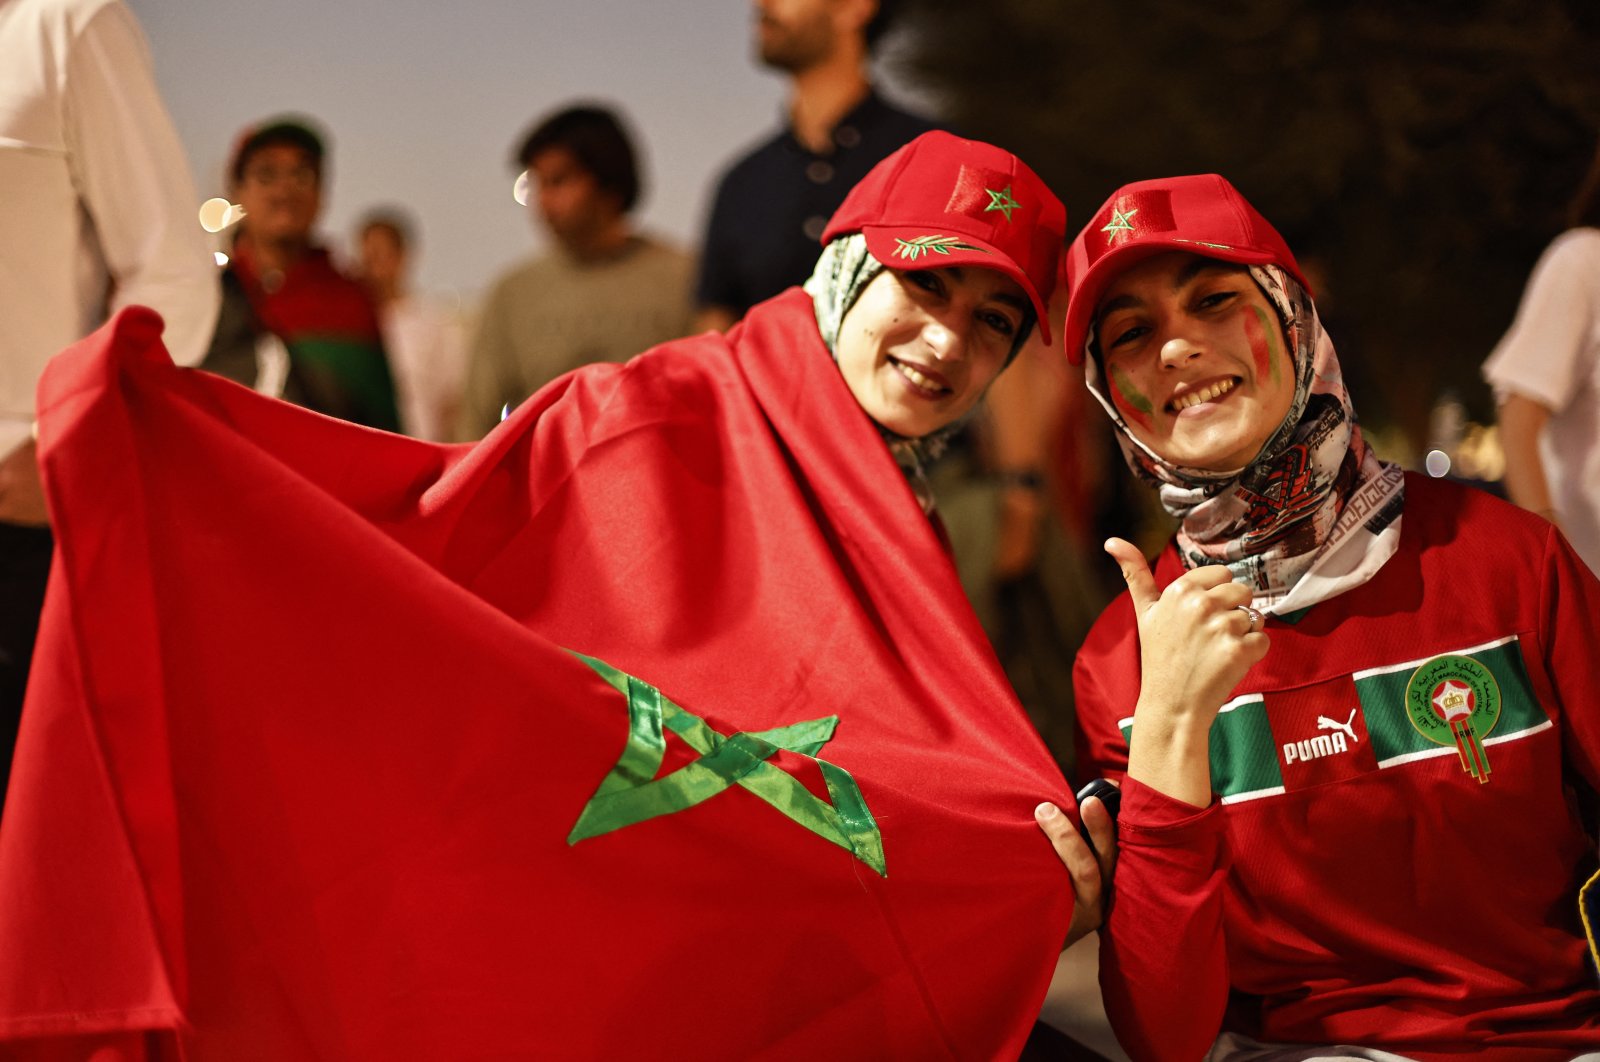 Morocco fans outside the stadium before the match of the FIFA World Cup Qatar 2022 round of 16 between Morocco and Spain at the Education City Stadium, Al Rayyan, Qatar, Dec. 6, 2022. (Reuters Photo)